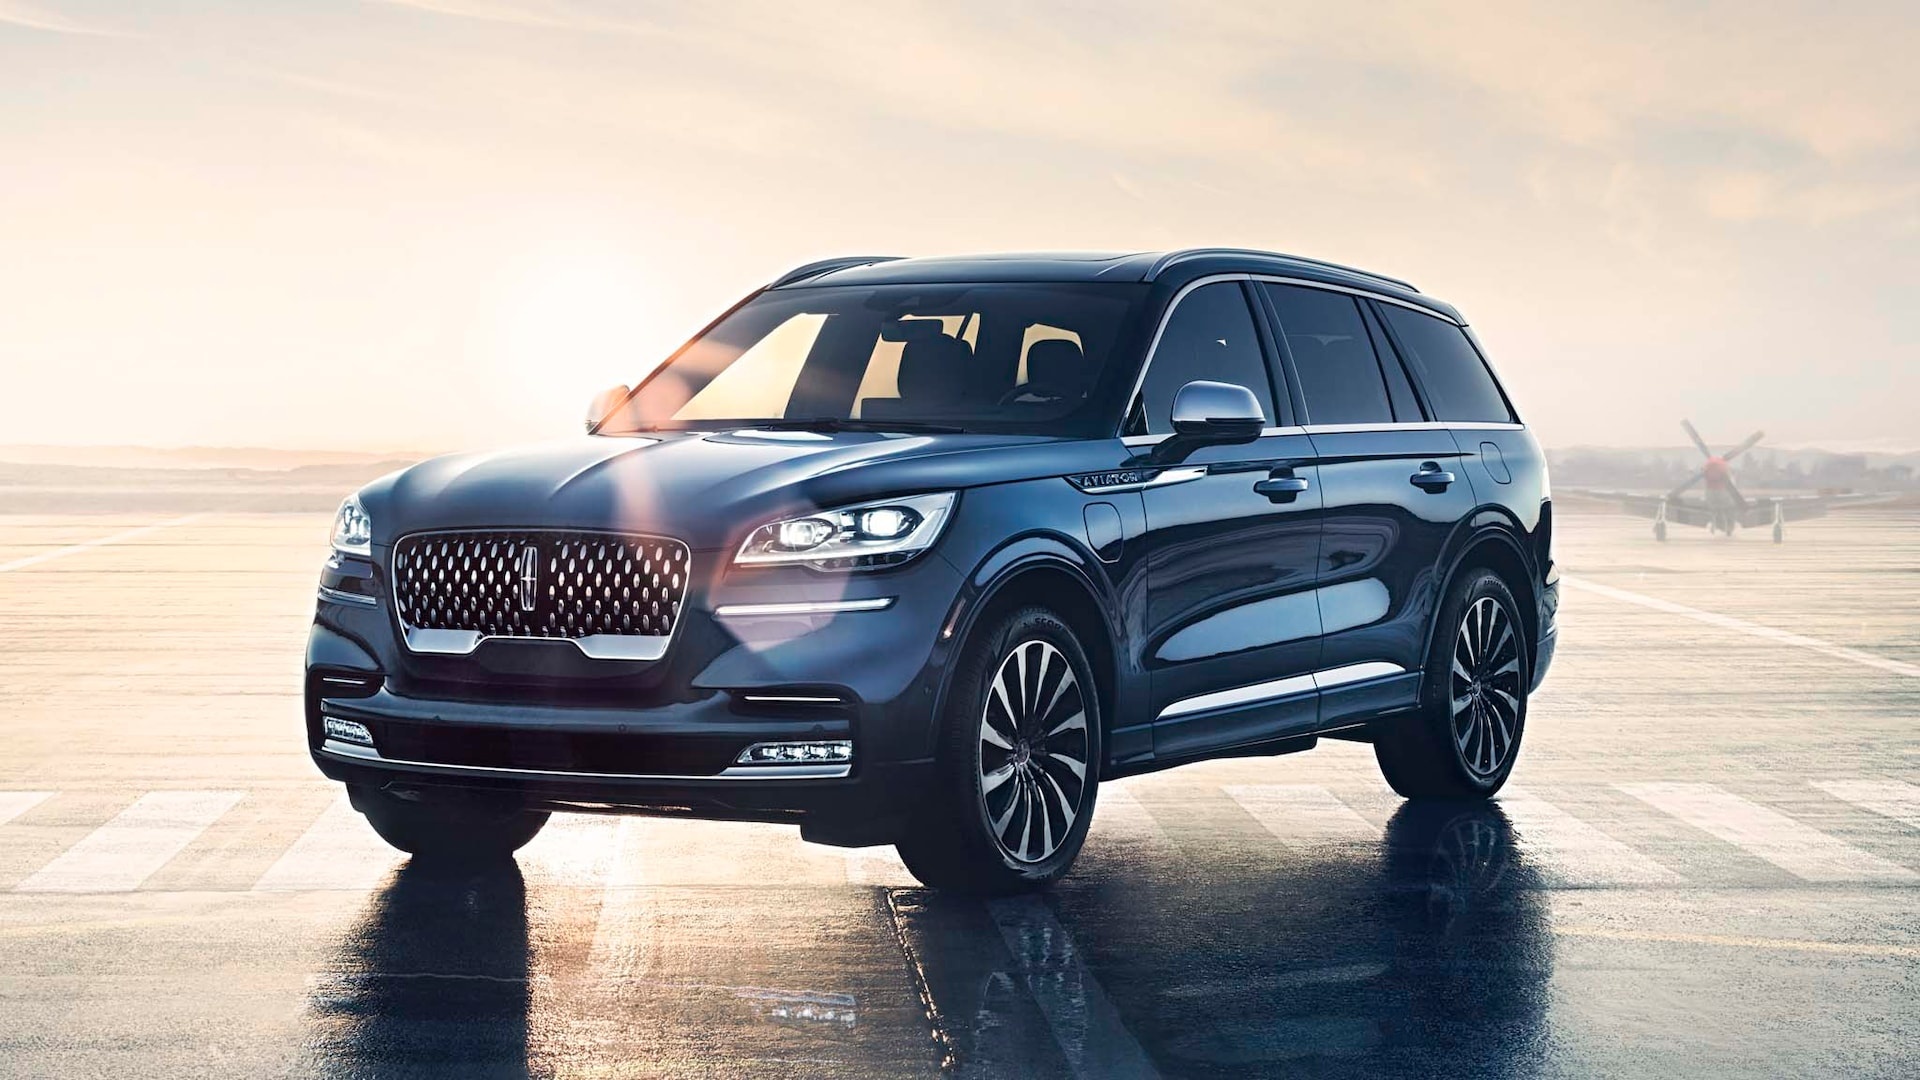 Lincoln Aviator buyers guide, Reviews, Specs, Comparisons, 1920x1080 Full HD Desktop